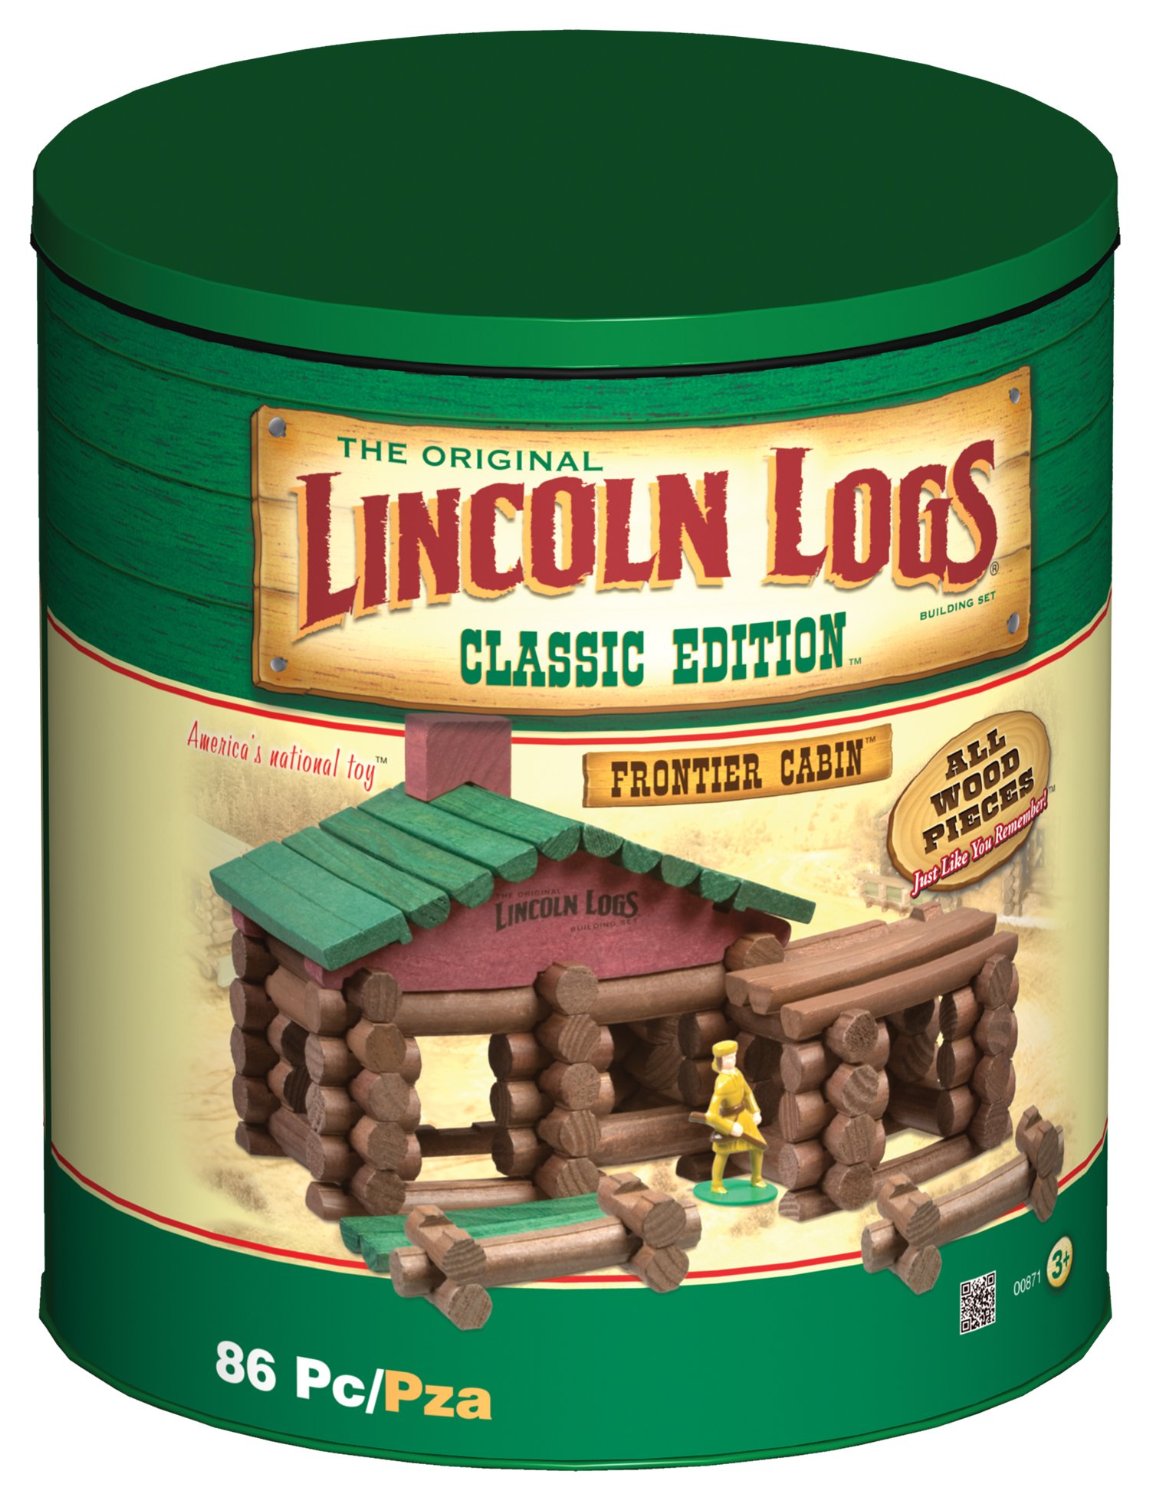 Lincoln Logs Classic Edition Tin Only $24.40 (Reg. $44.99)